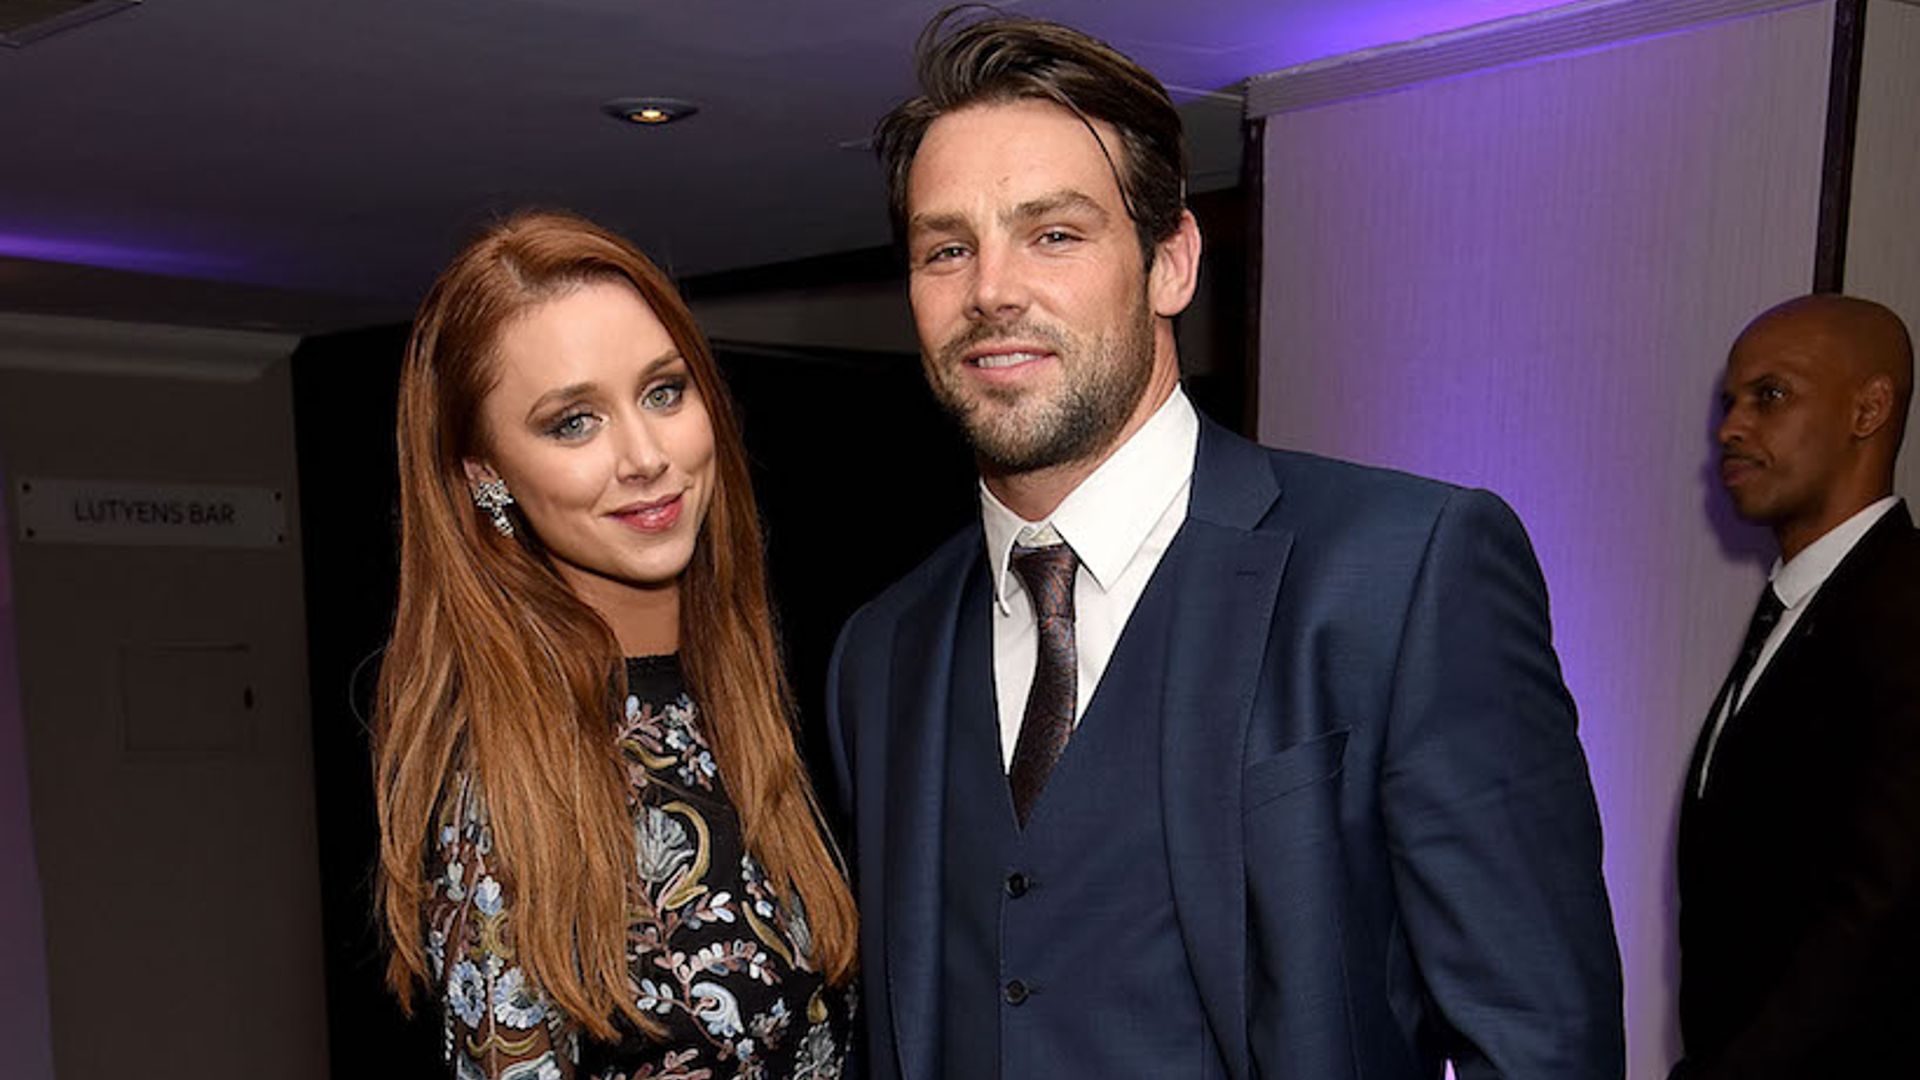 The Saturdays star Una Healy announces split from rugby player husband Ben Foden